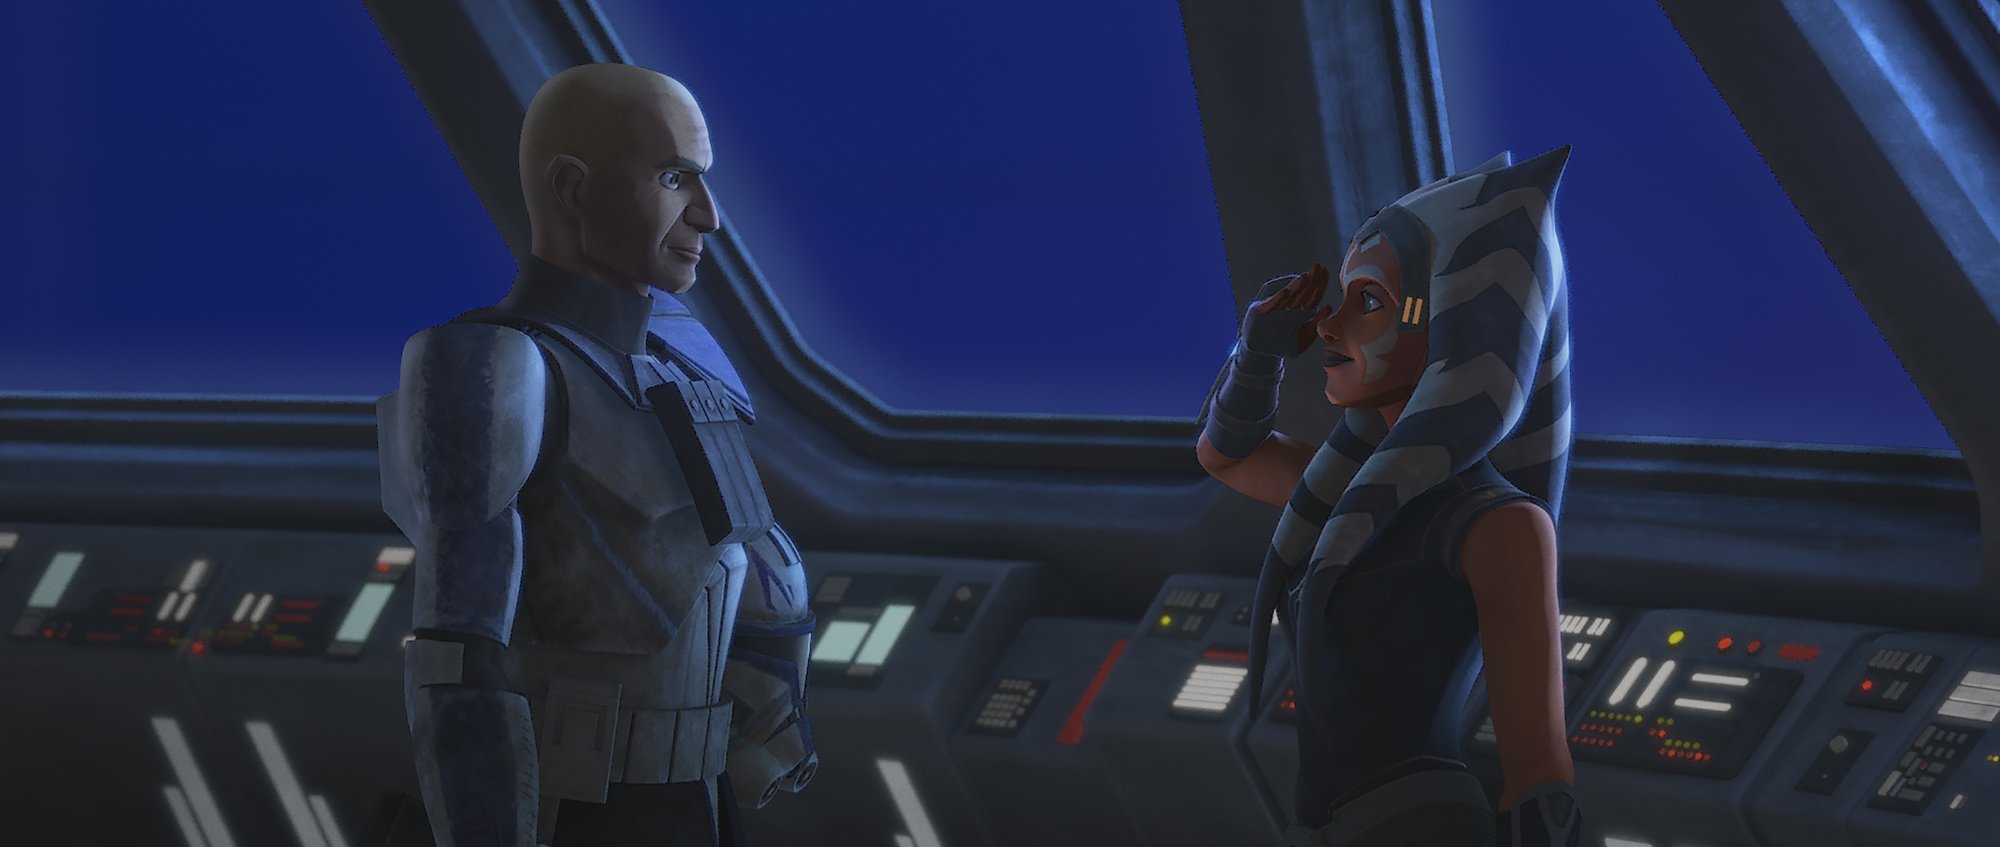 Rex and Ahsoka in hyperspace, right before Order 66 in 'Star Wars: The Clone Wars'' Season 7.